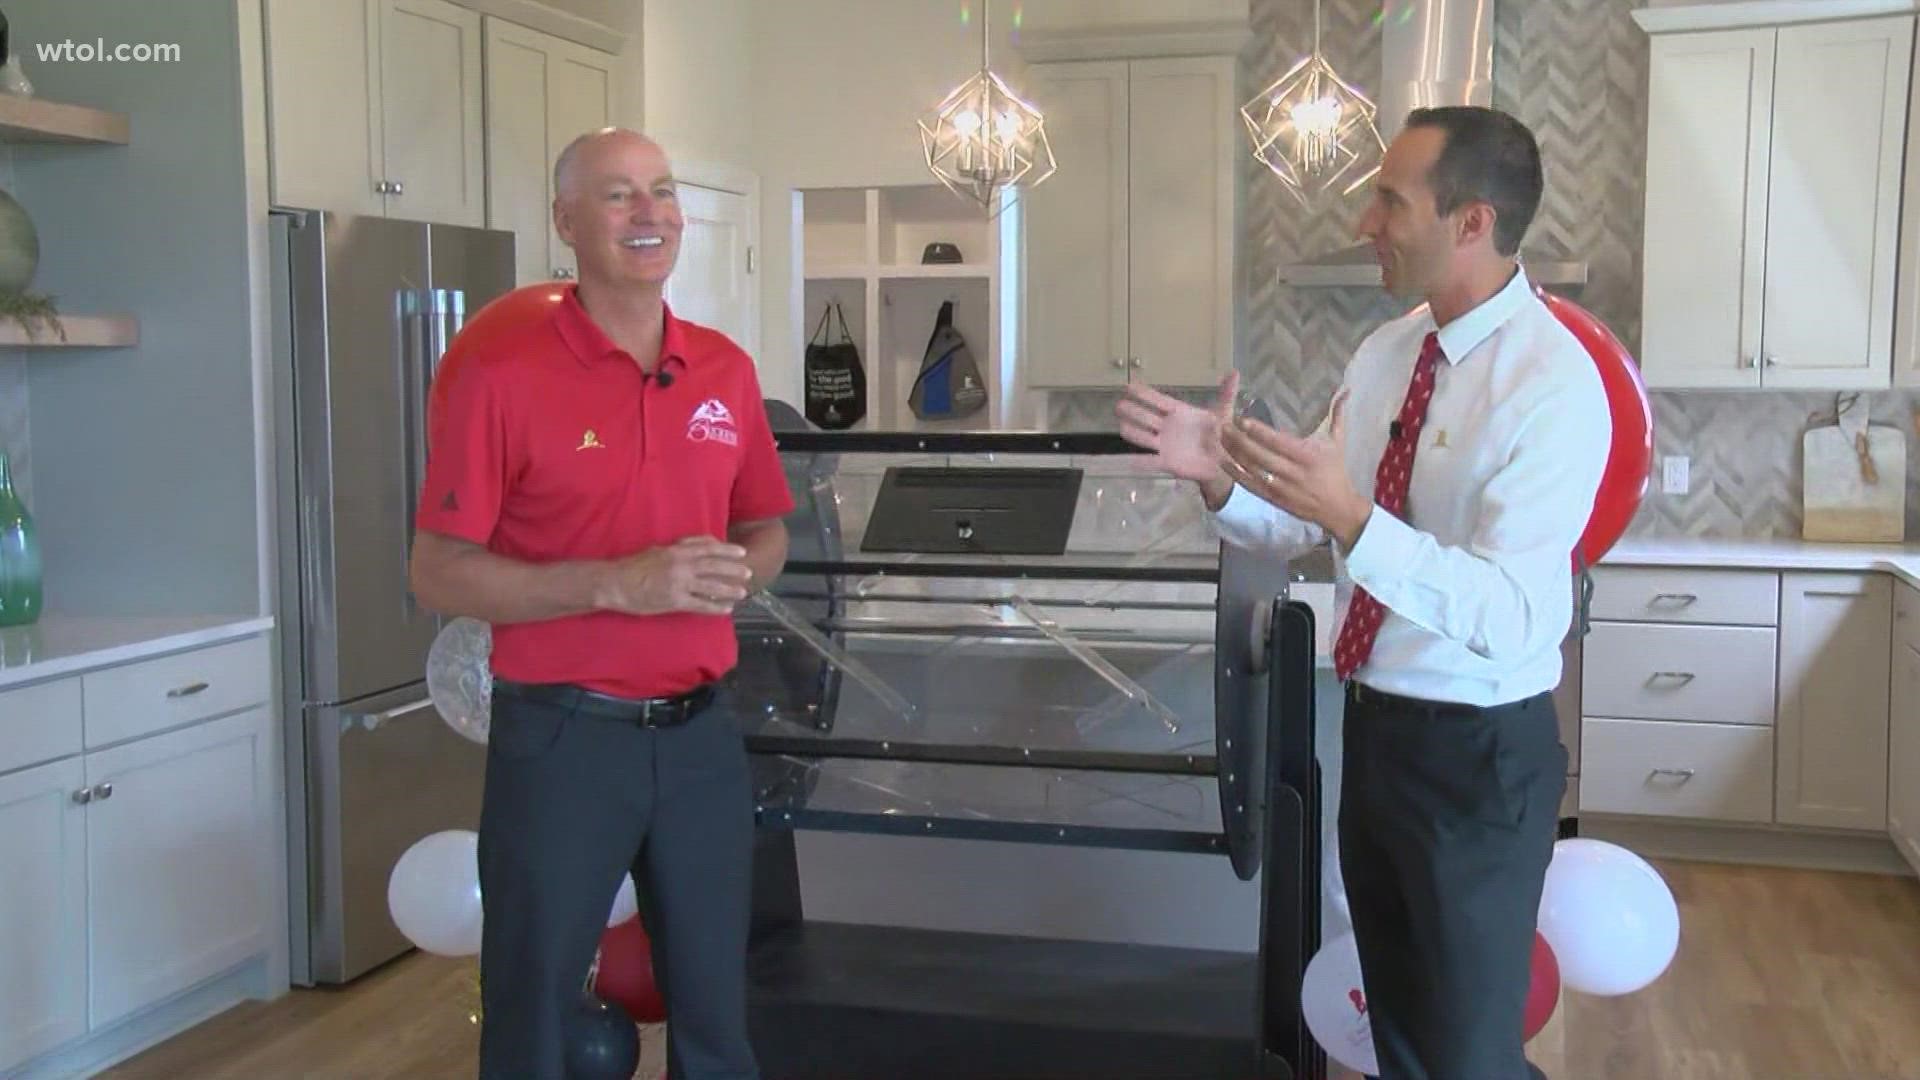 The 2021 St. Jude Dream Home giveaway starts at 5 p.m. Aug. 12. Tune in to see who wins!